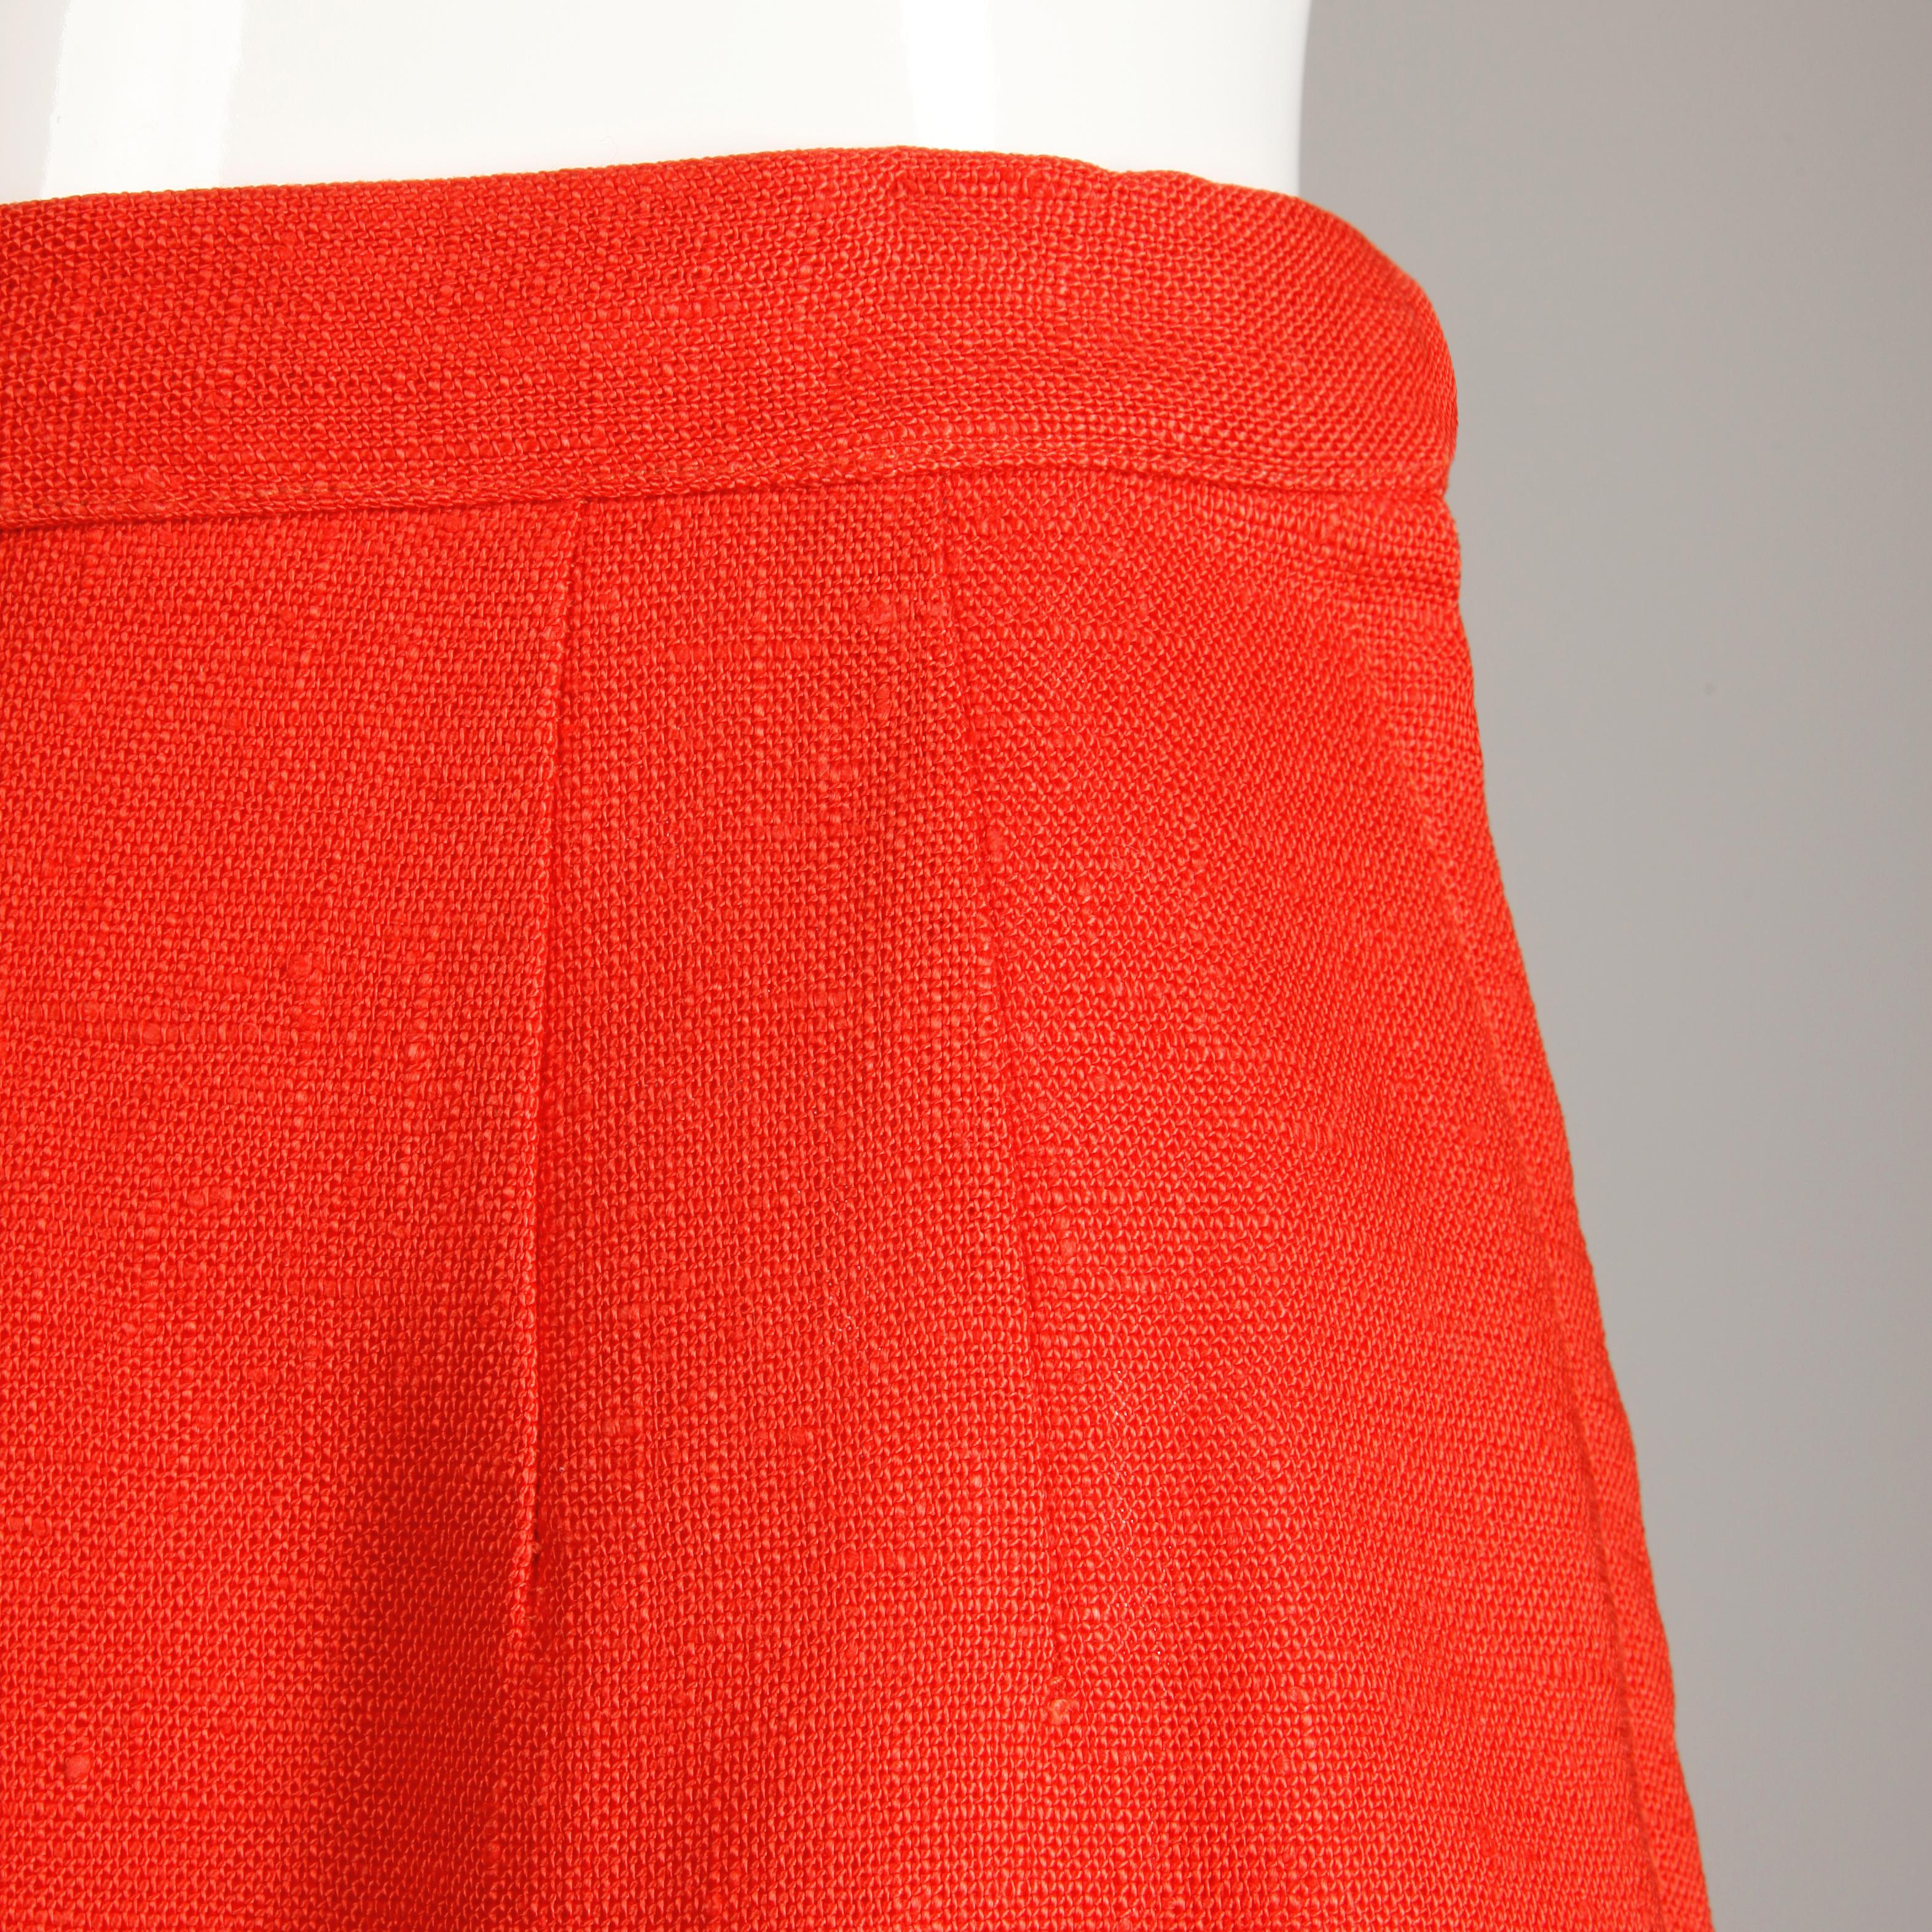 1962 B.H. Wragge Vintage Red Woven Linen/ Silk Pencil Skirt In Excellent Condition For Sale In Sparks, NV